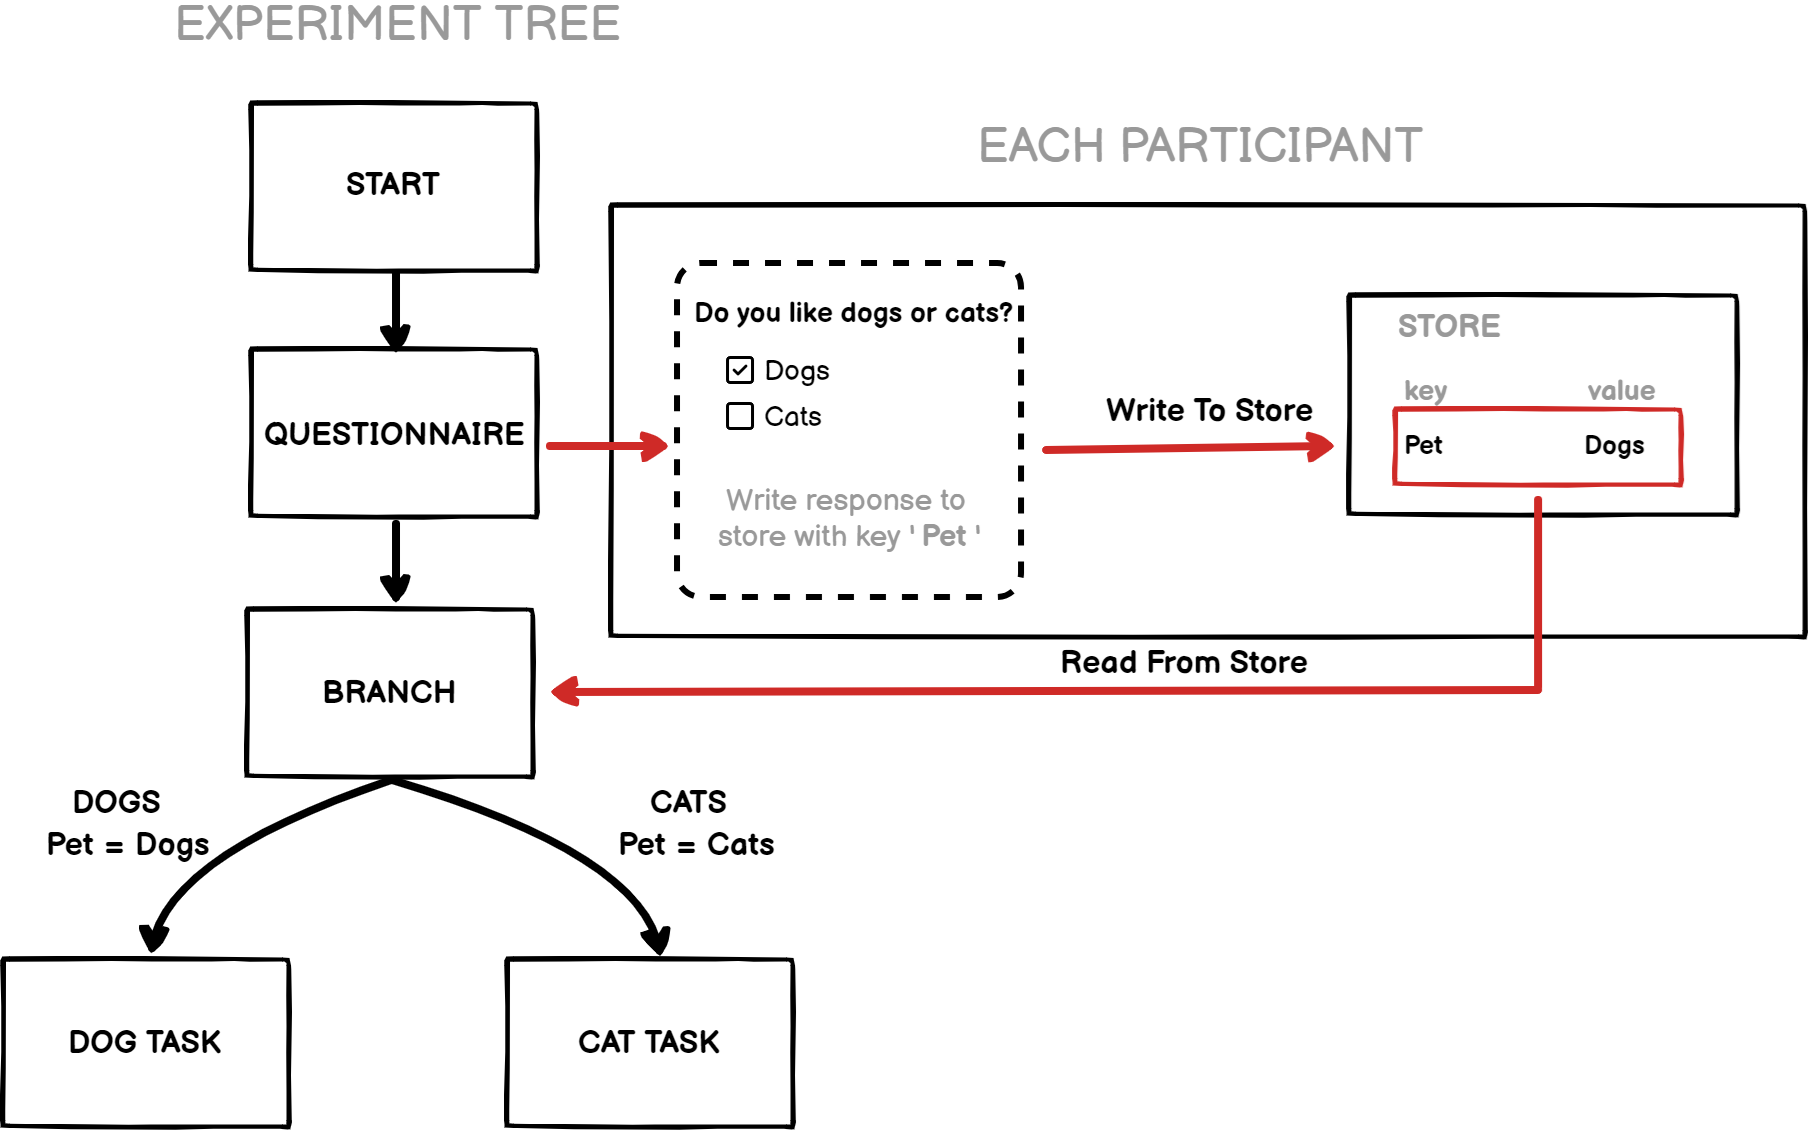 Schematic of an experiment branching participants to a Dog Task or Cat Task depending on their Pet value saved in the Store